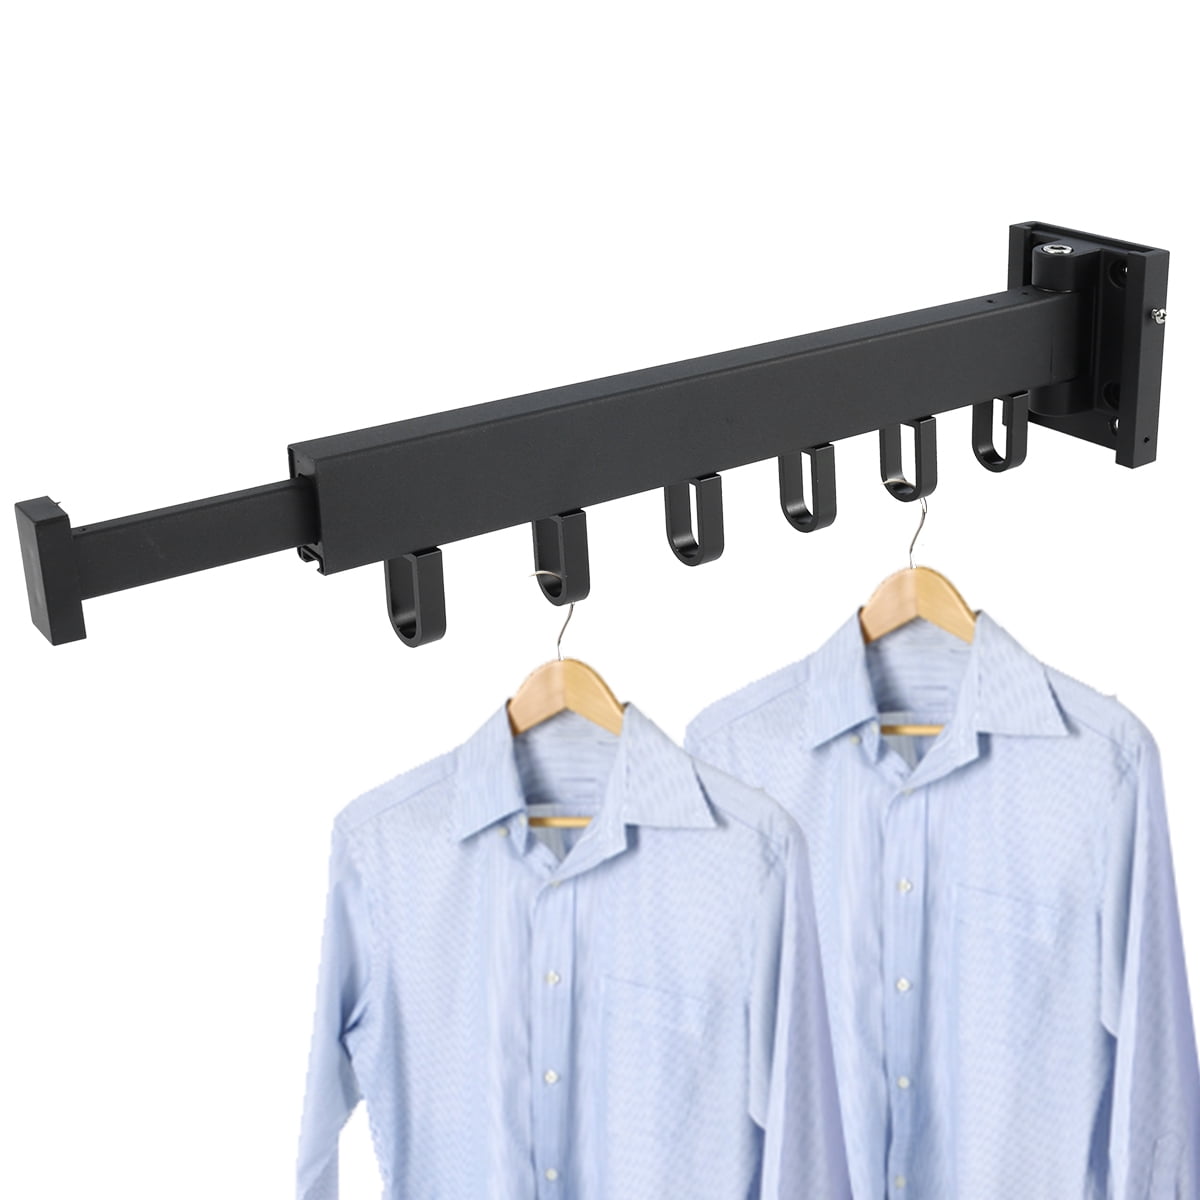 Adjustable and Retrackable Space-Saver Clothes Drying Rack – SPS